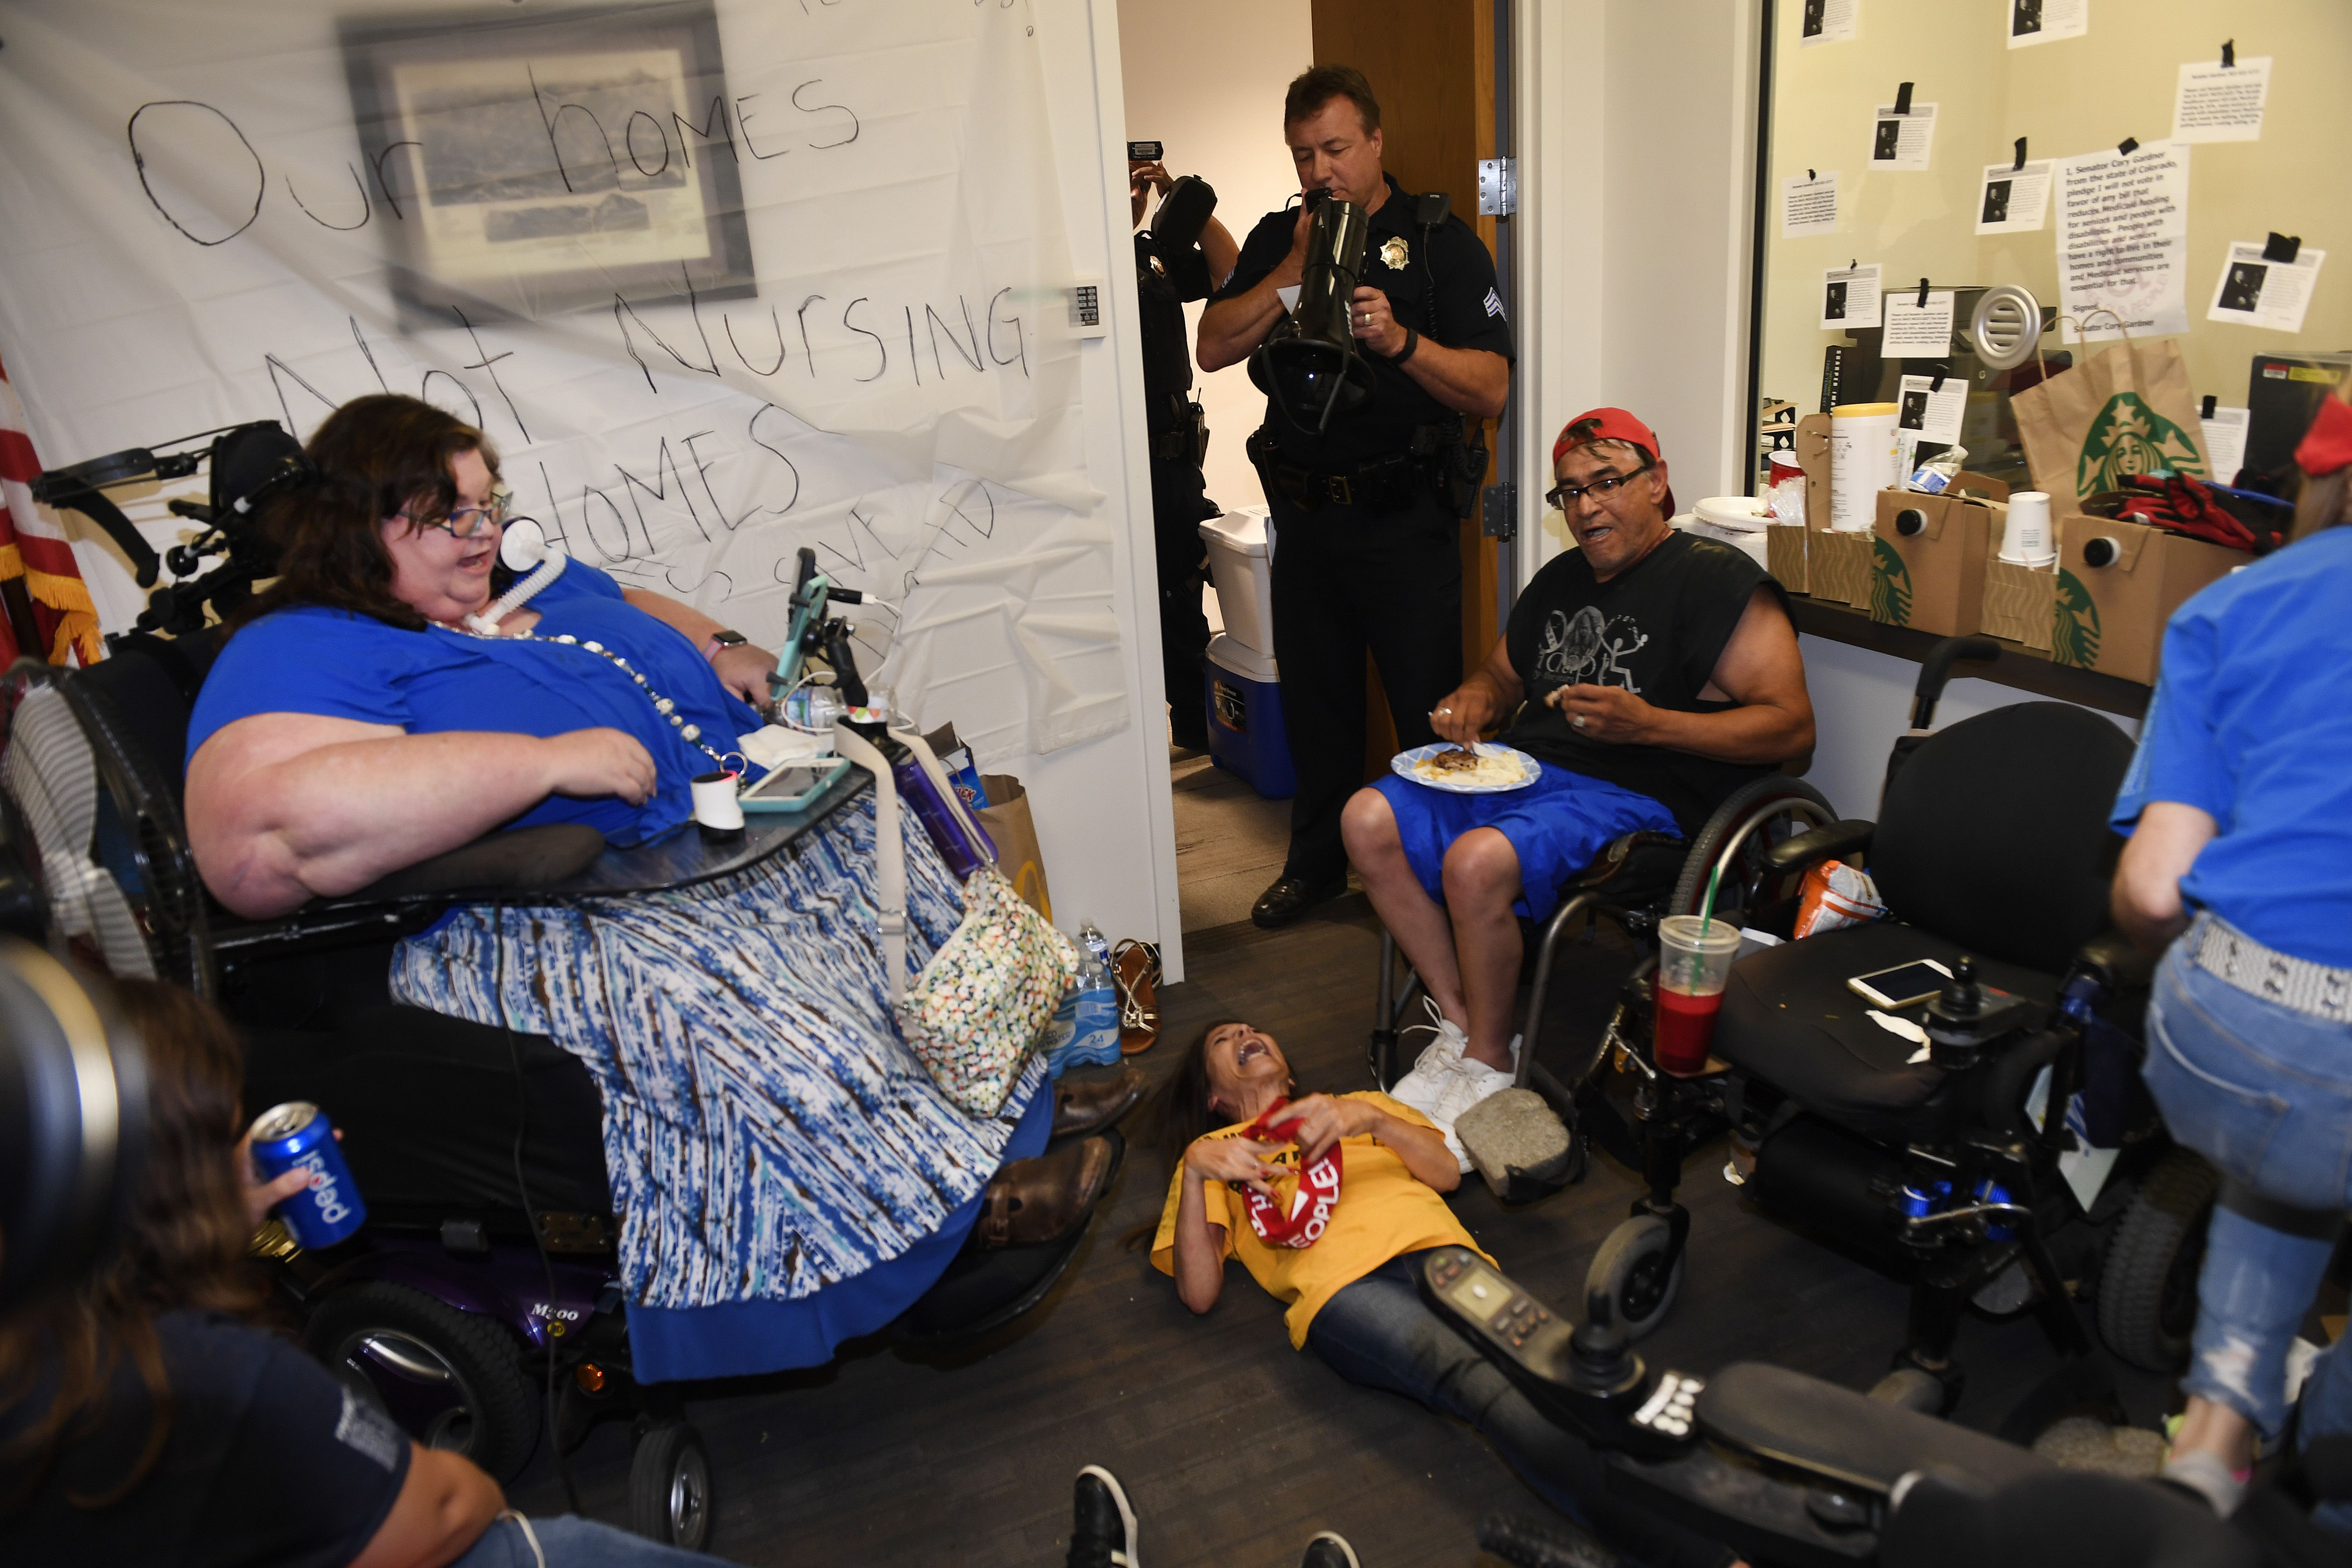 A group of people in wheelchairs, with one person lying on the ground, sits in a room surrounded by police.